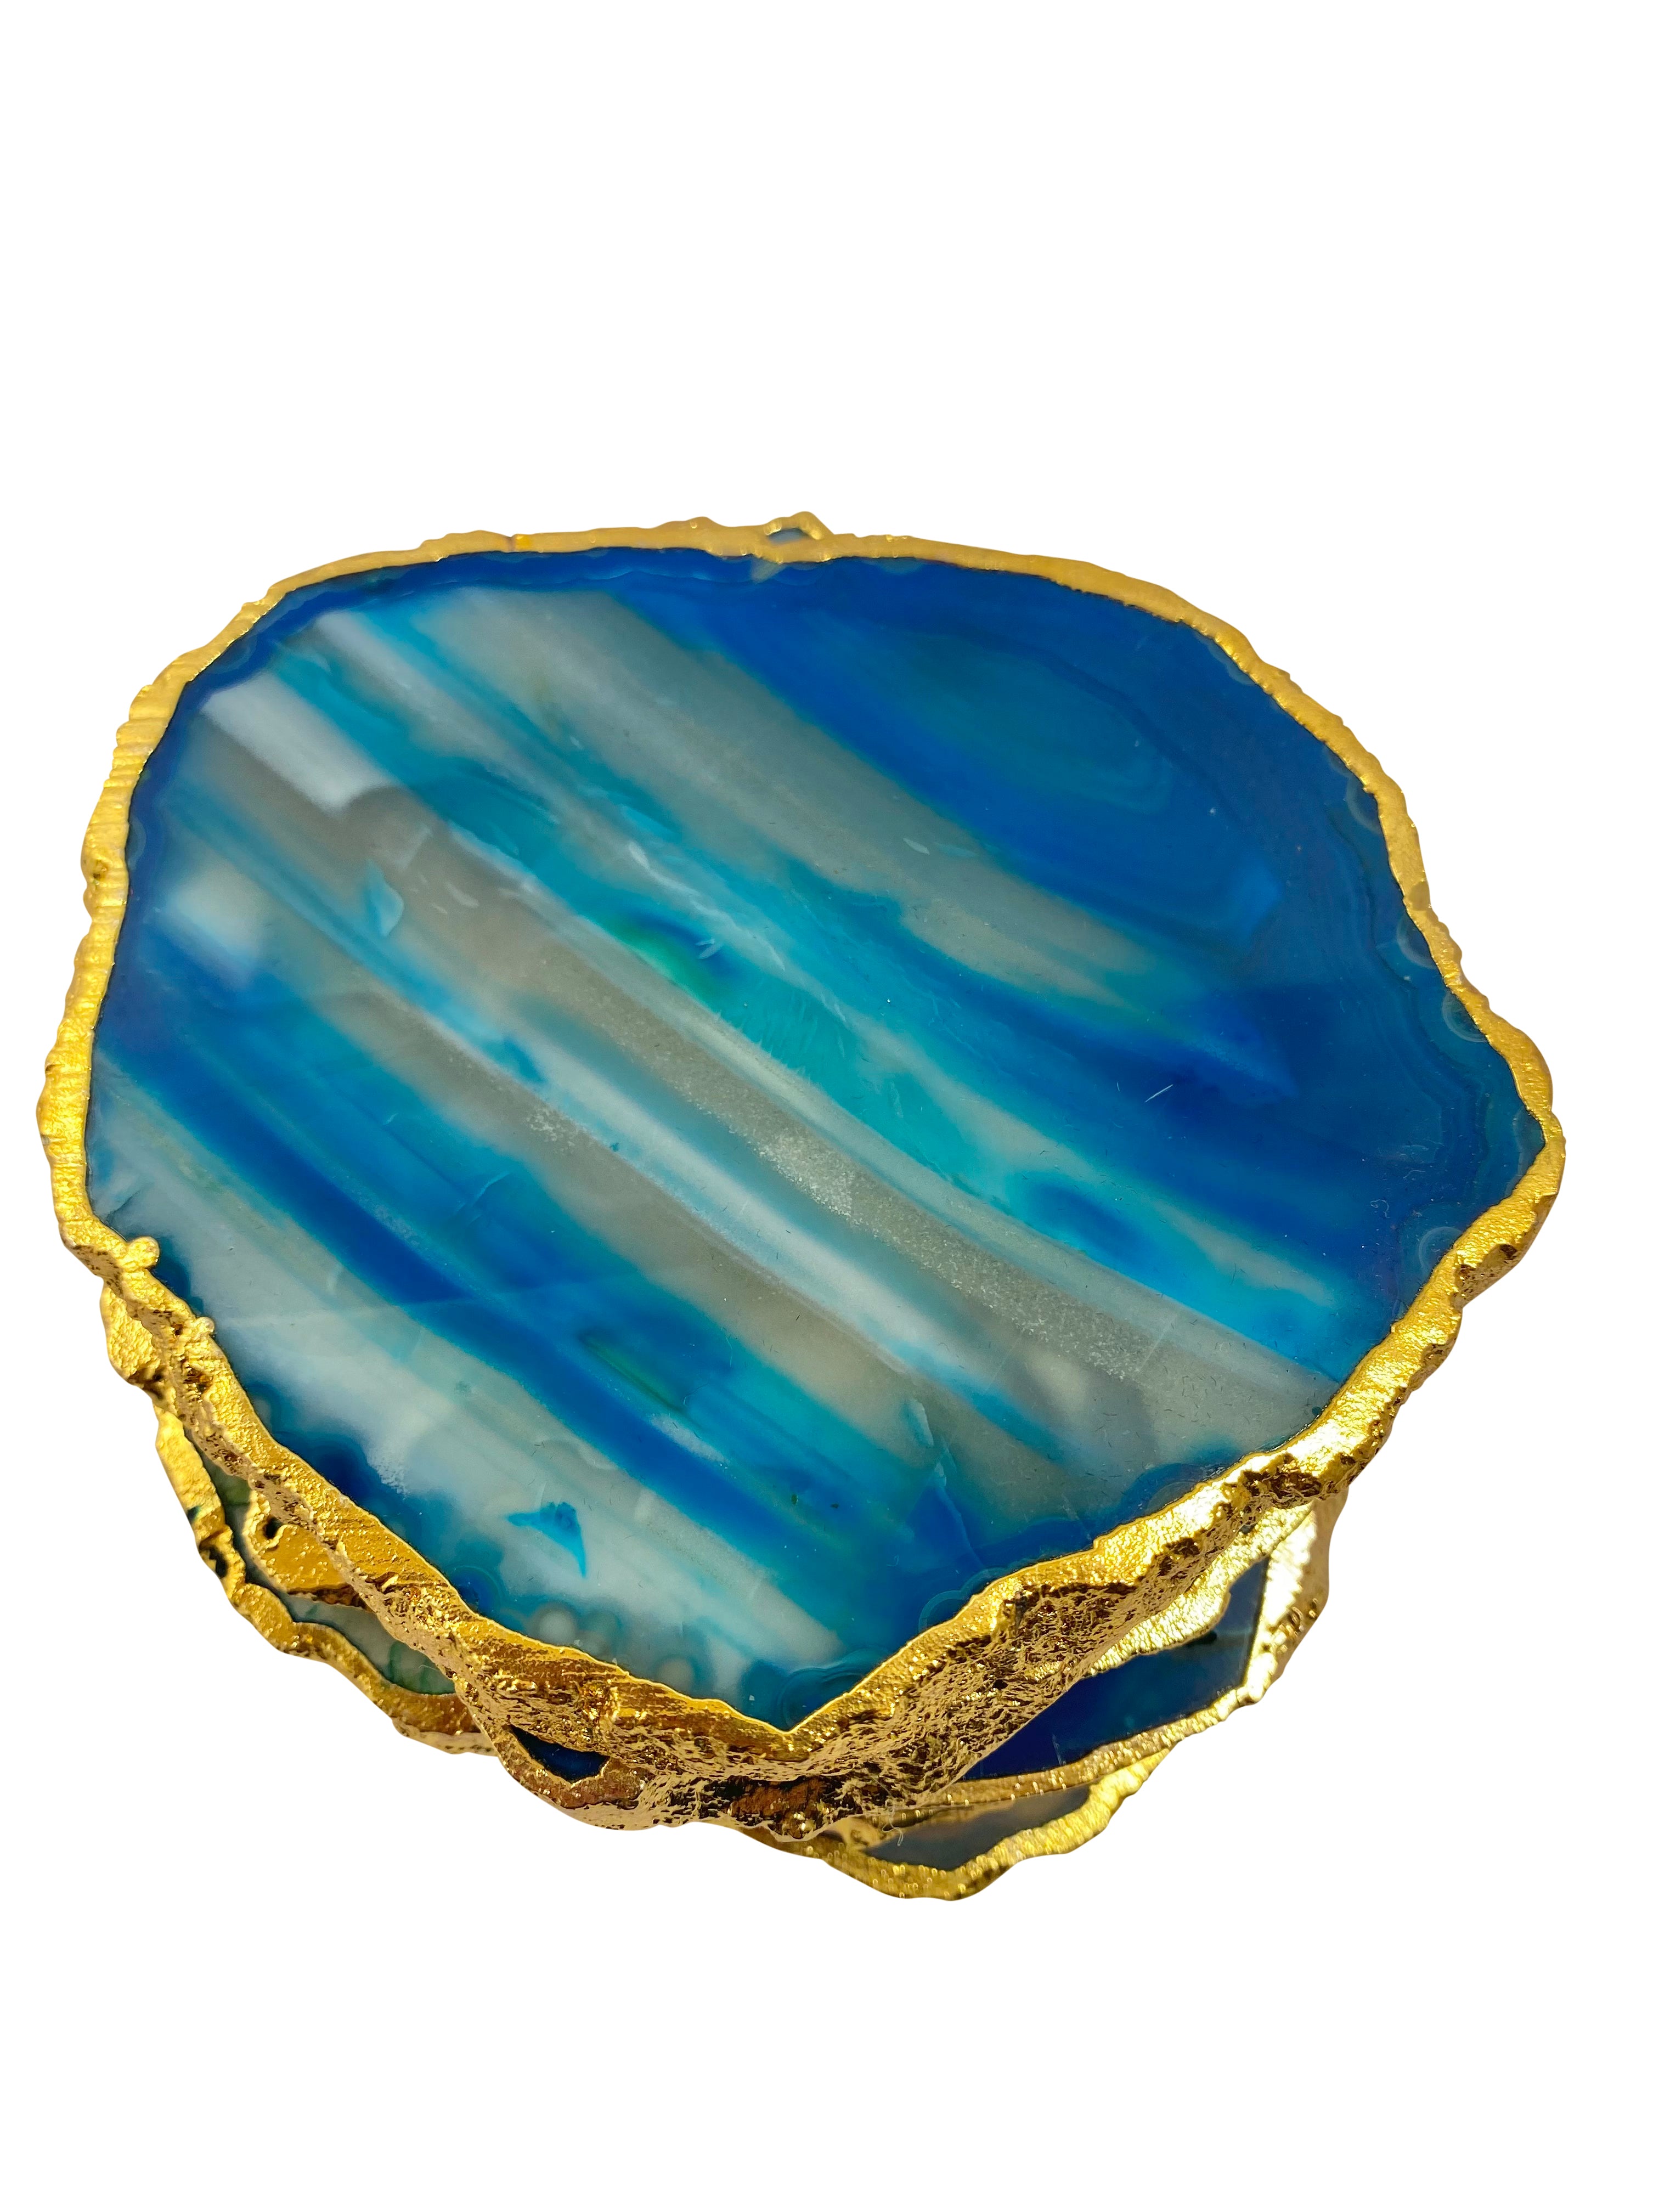 Blue Dyed Agate Coaster Natural Shape Gold - 2 Pieces